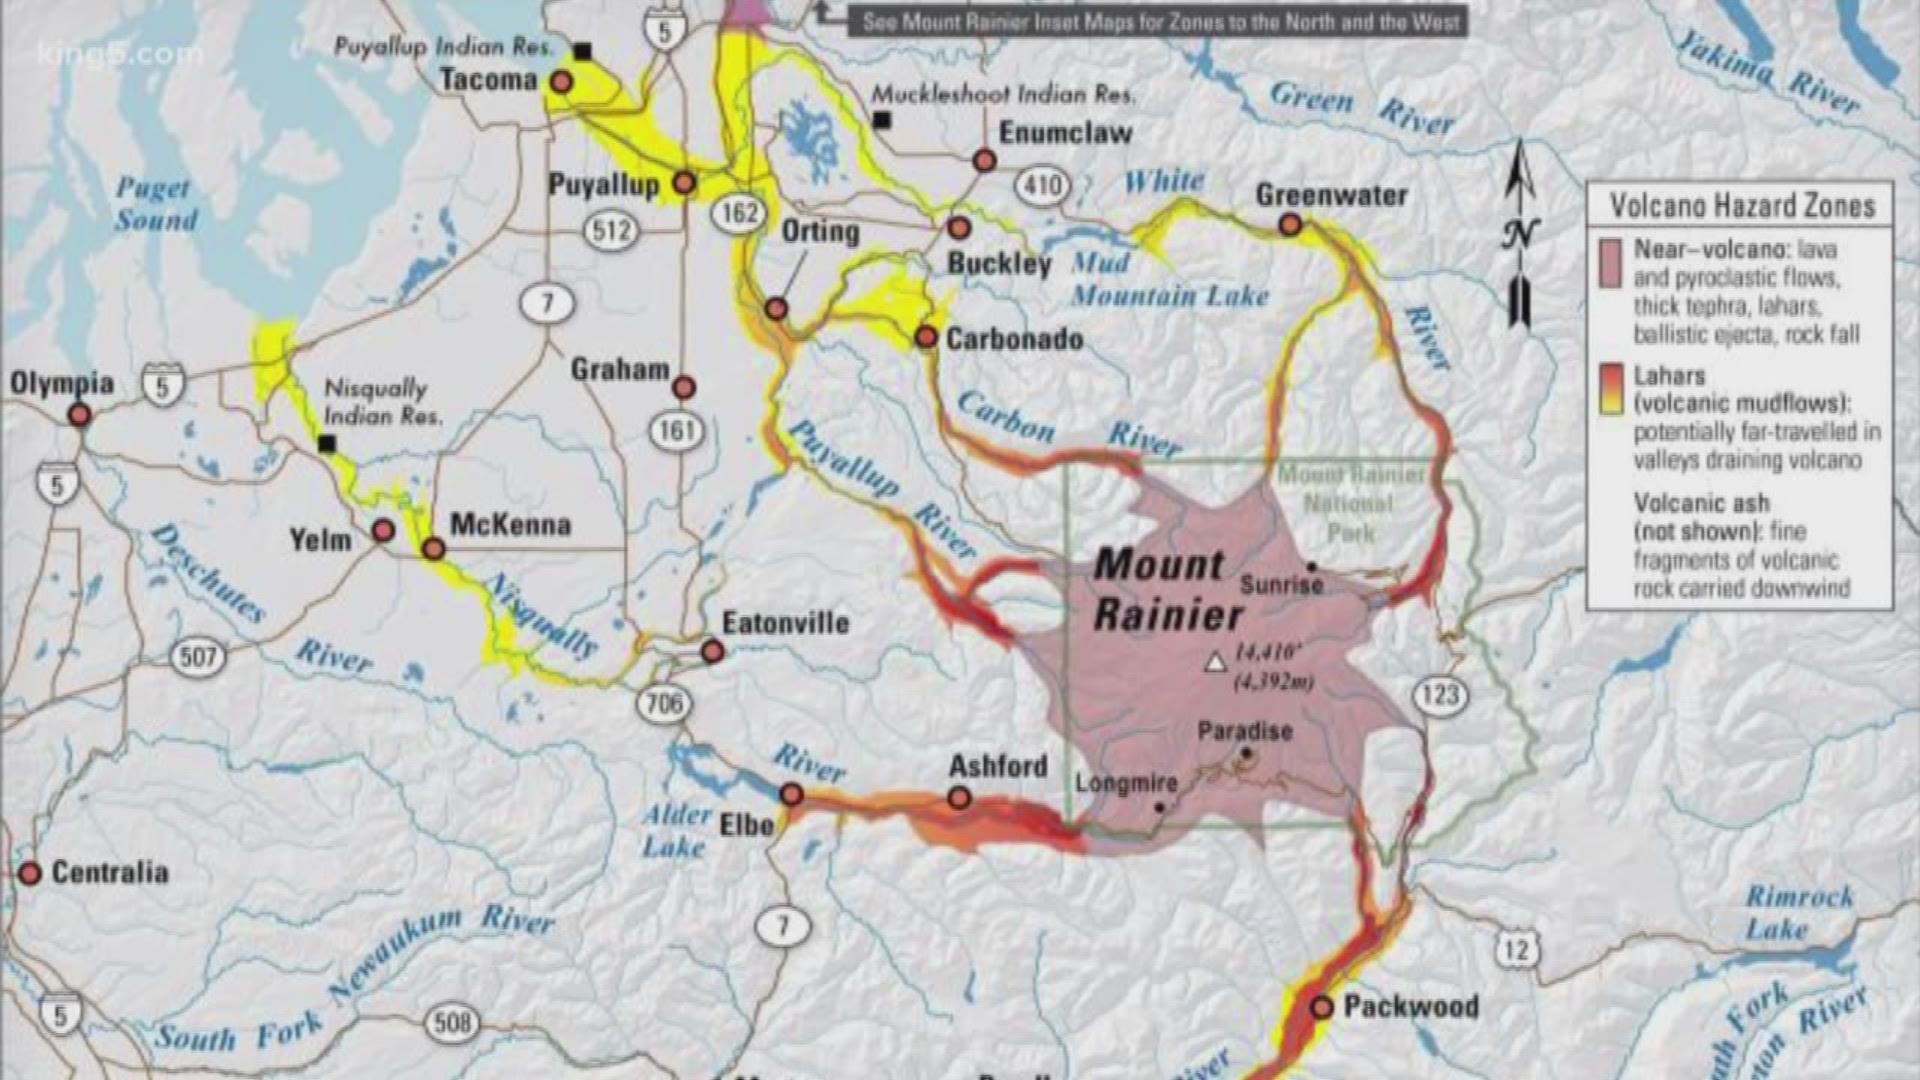 Though it doesn’t have a history of explosive eruptions, Mount Rainier is the third-highest risk volcano in the U.S. It also has the highest number of people in the downstream hazard zone, around 300,000 people.